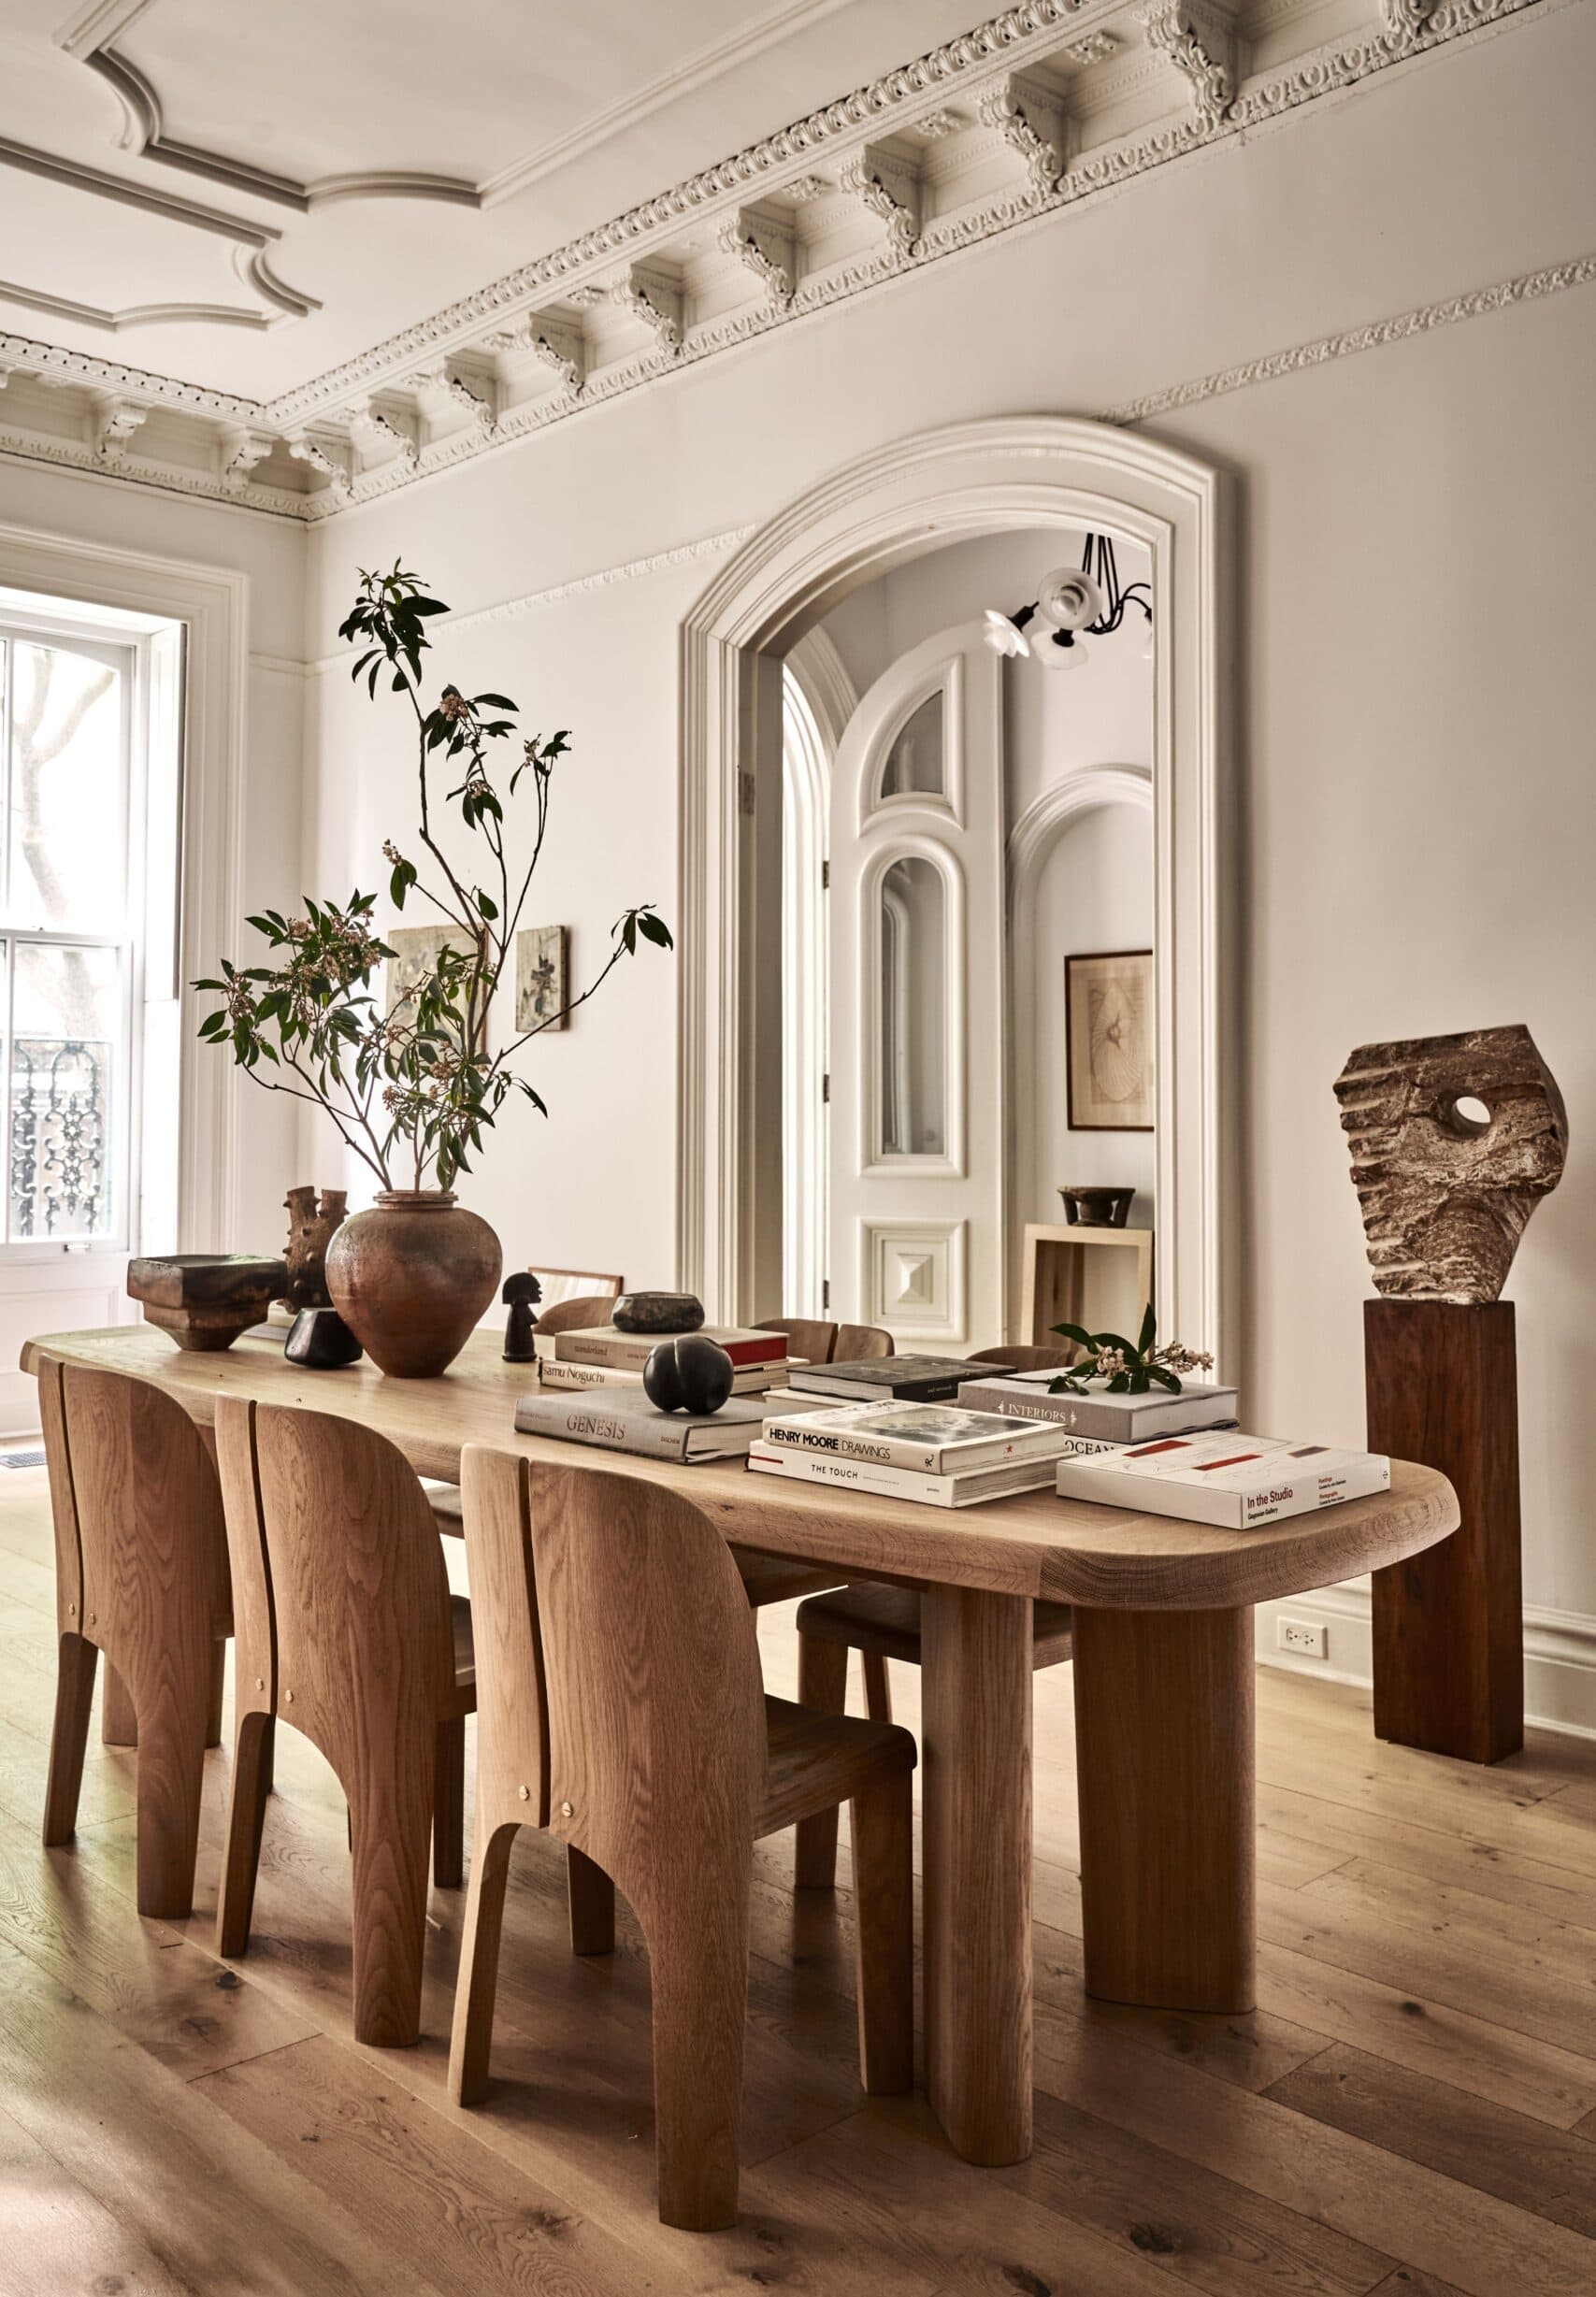 Want Timeless Decor Style? Check Out West Elm's Collection With Colin King